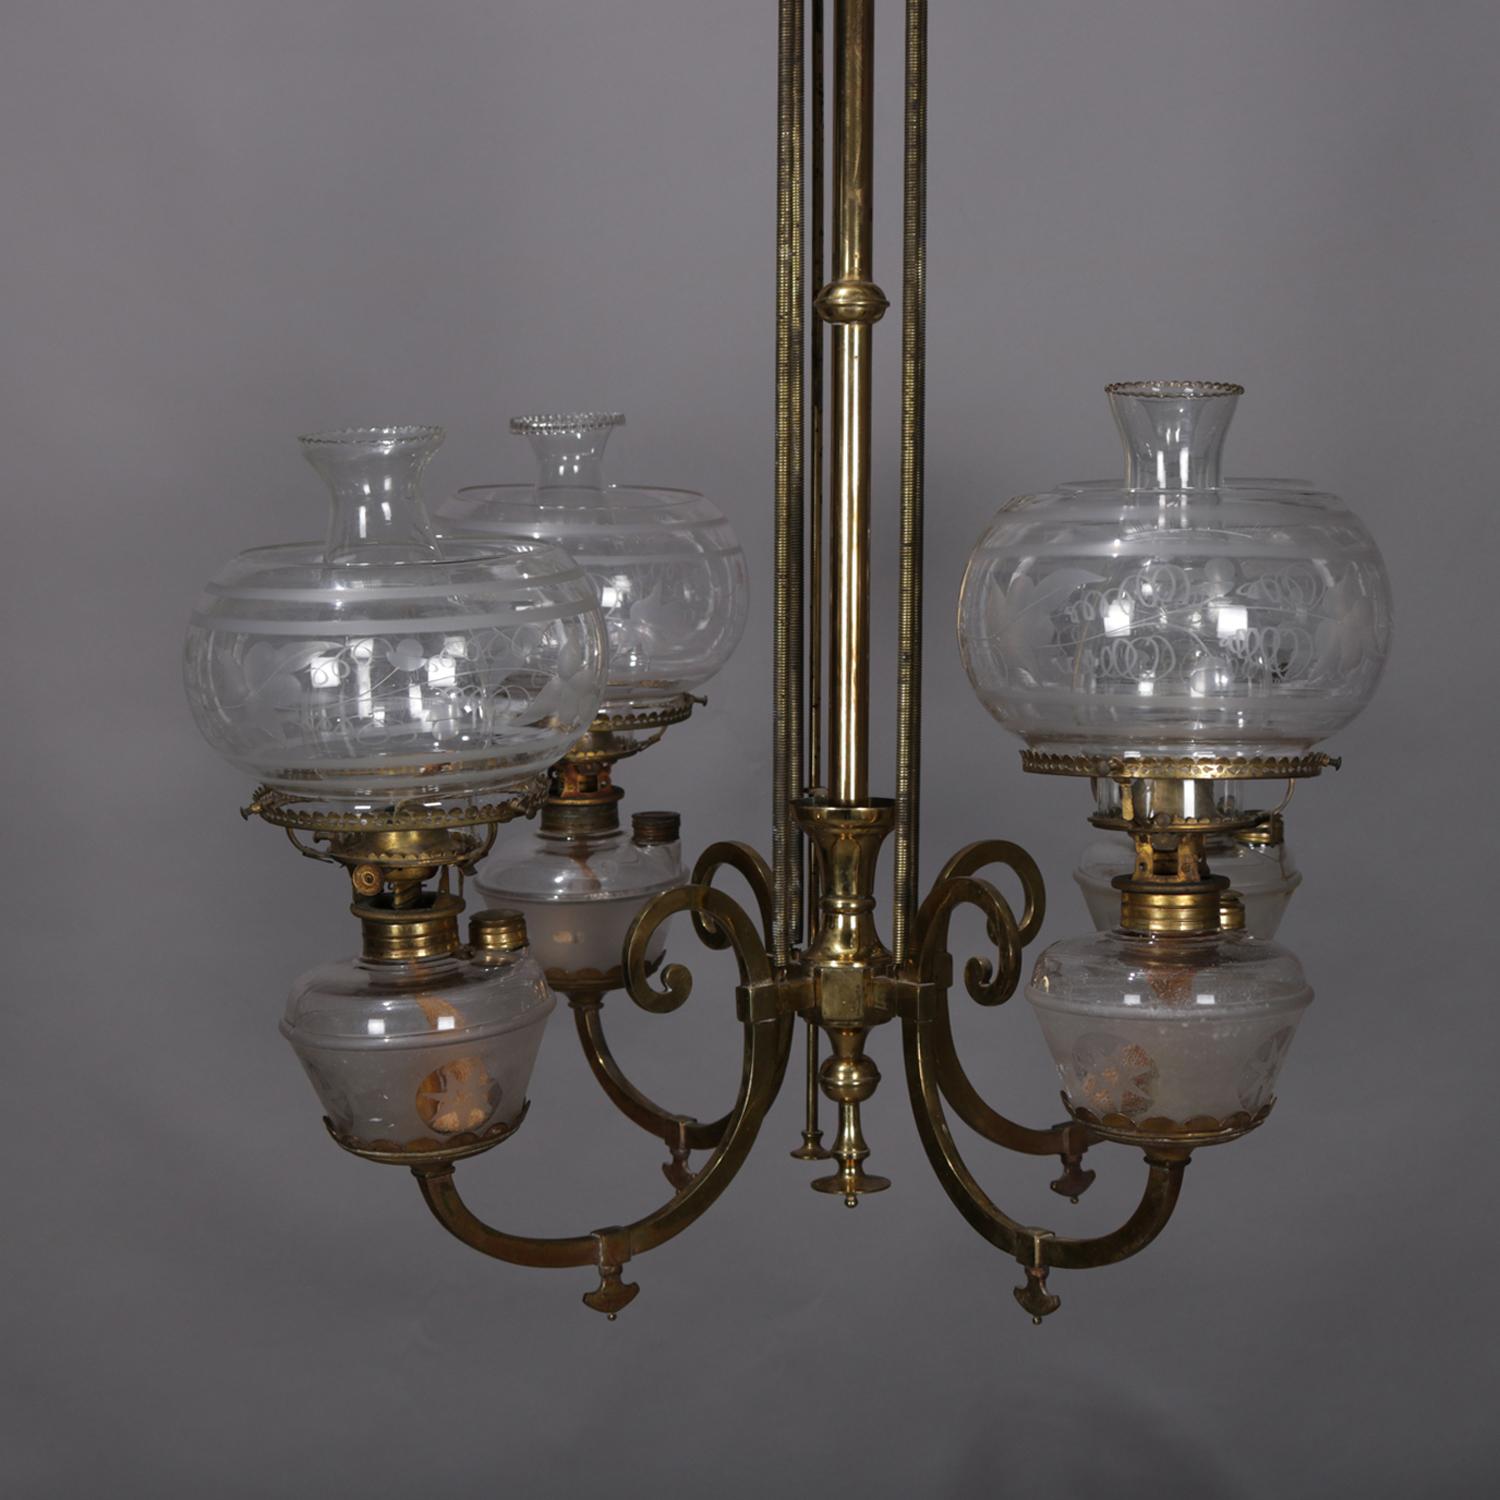 An early kerosene chandelier features brass frame with central column having four c-scroll arms terminating in gas lamps with glass fonts and etched glass shades, circa 1870.

Measures: 36